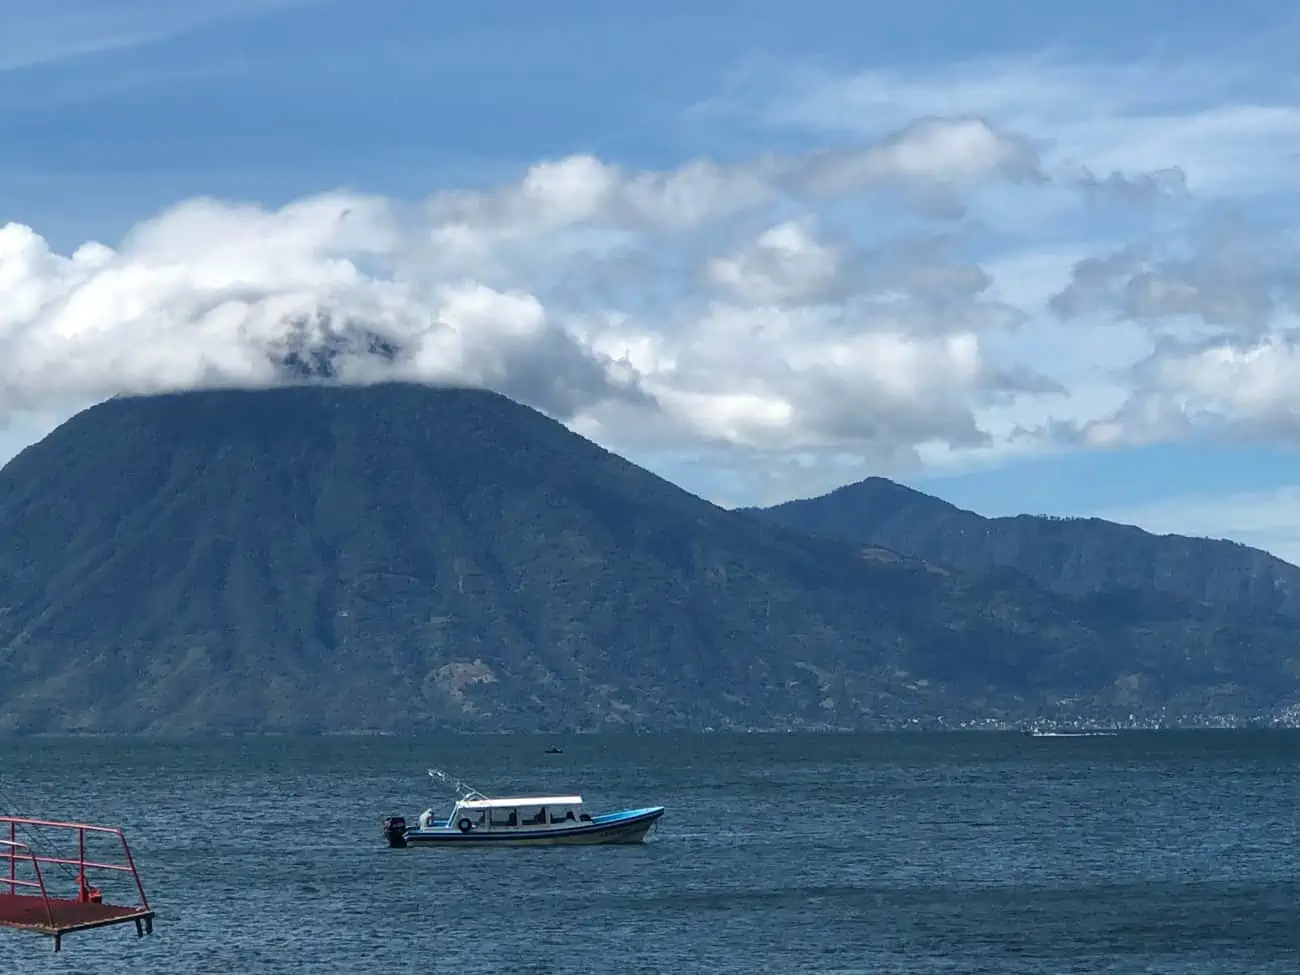 A body of water with a boat in the foreground and a mountain in the background with some clouds on the mountain's peak